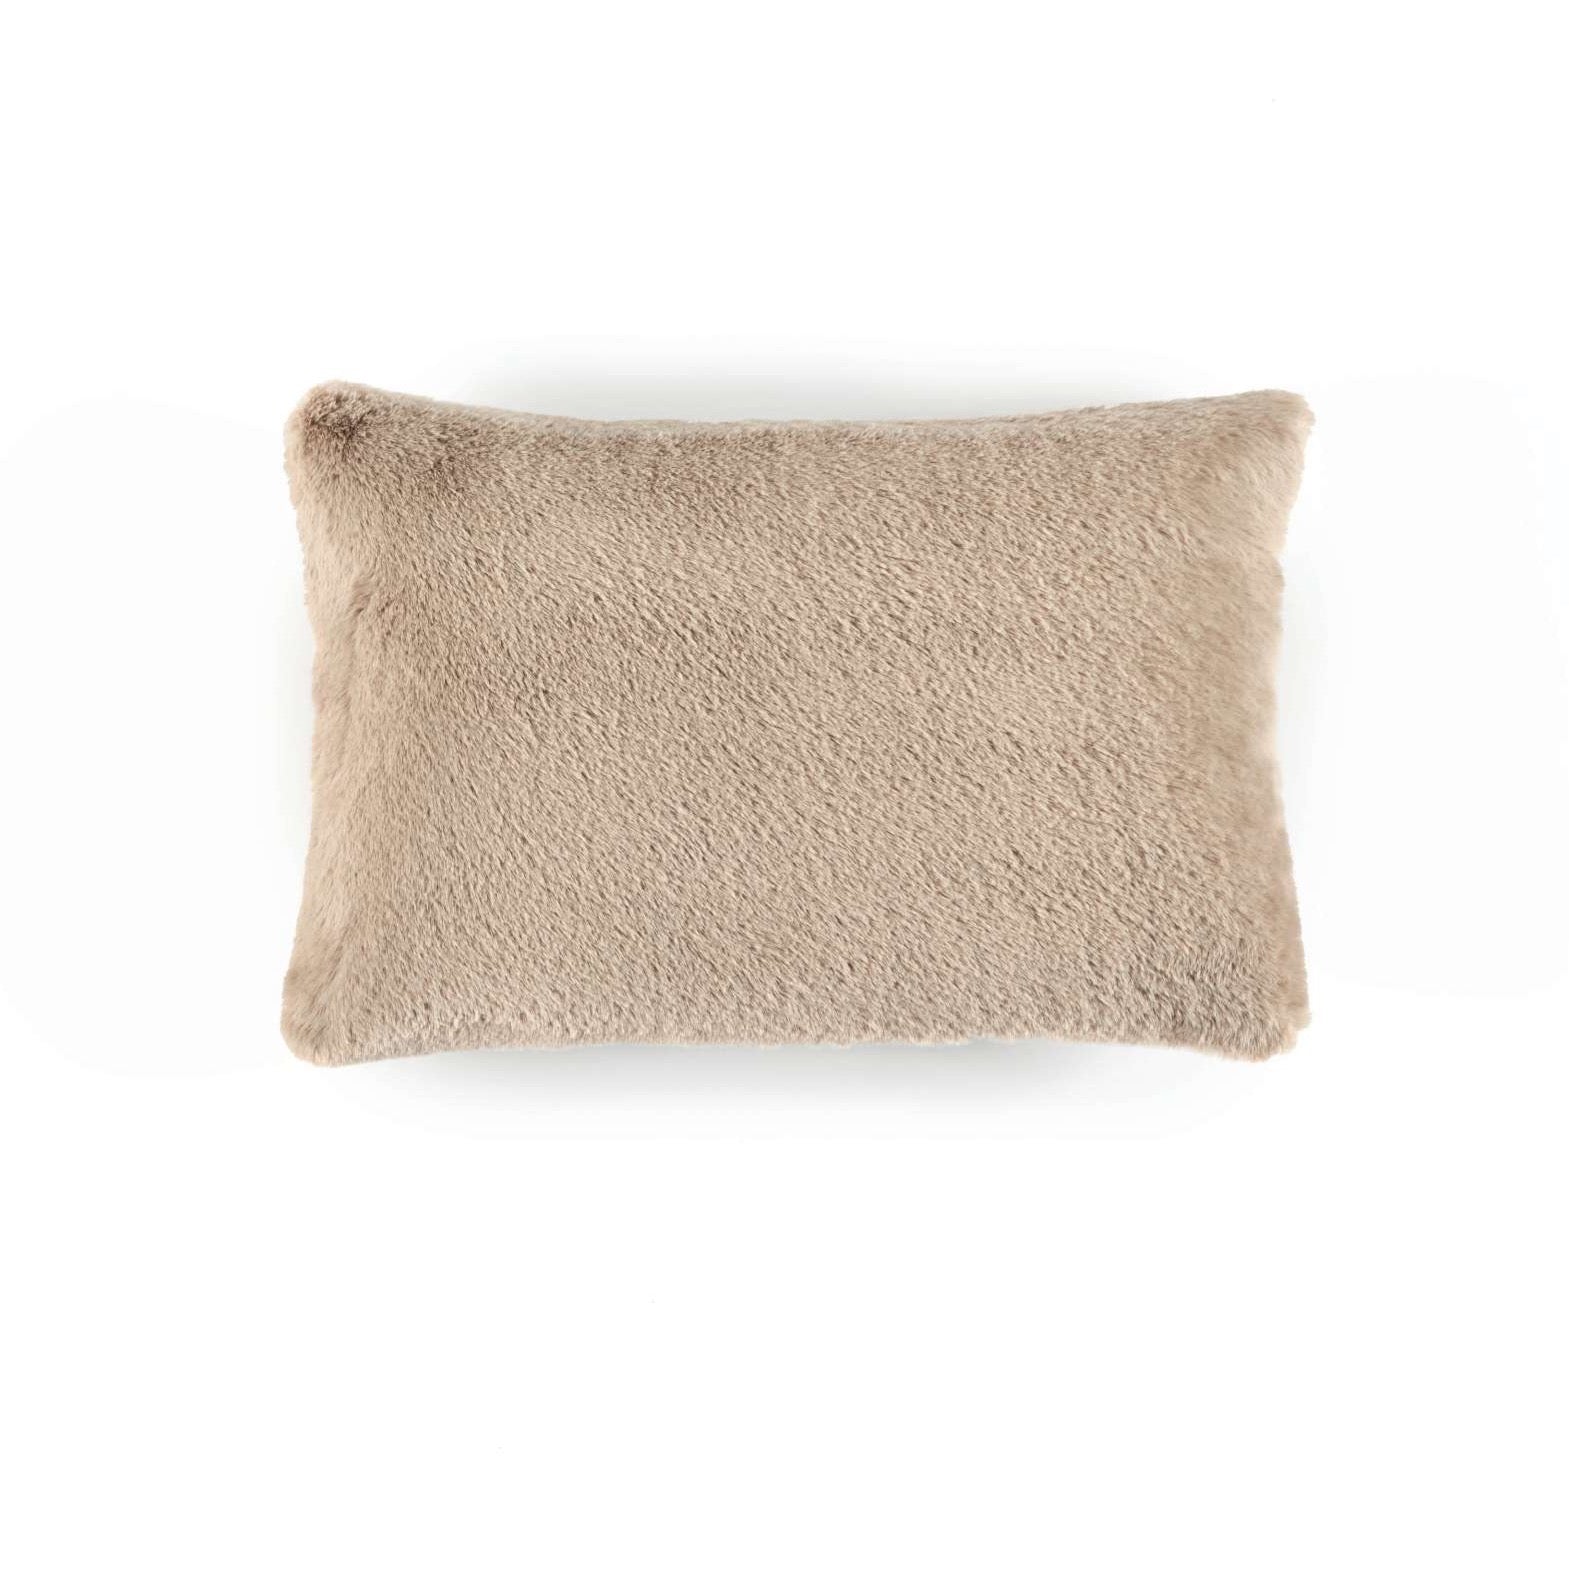 Winter CO 219 14 04 Sable Small Cushion Cover